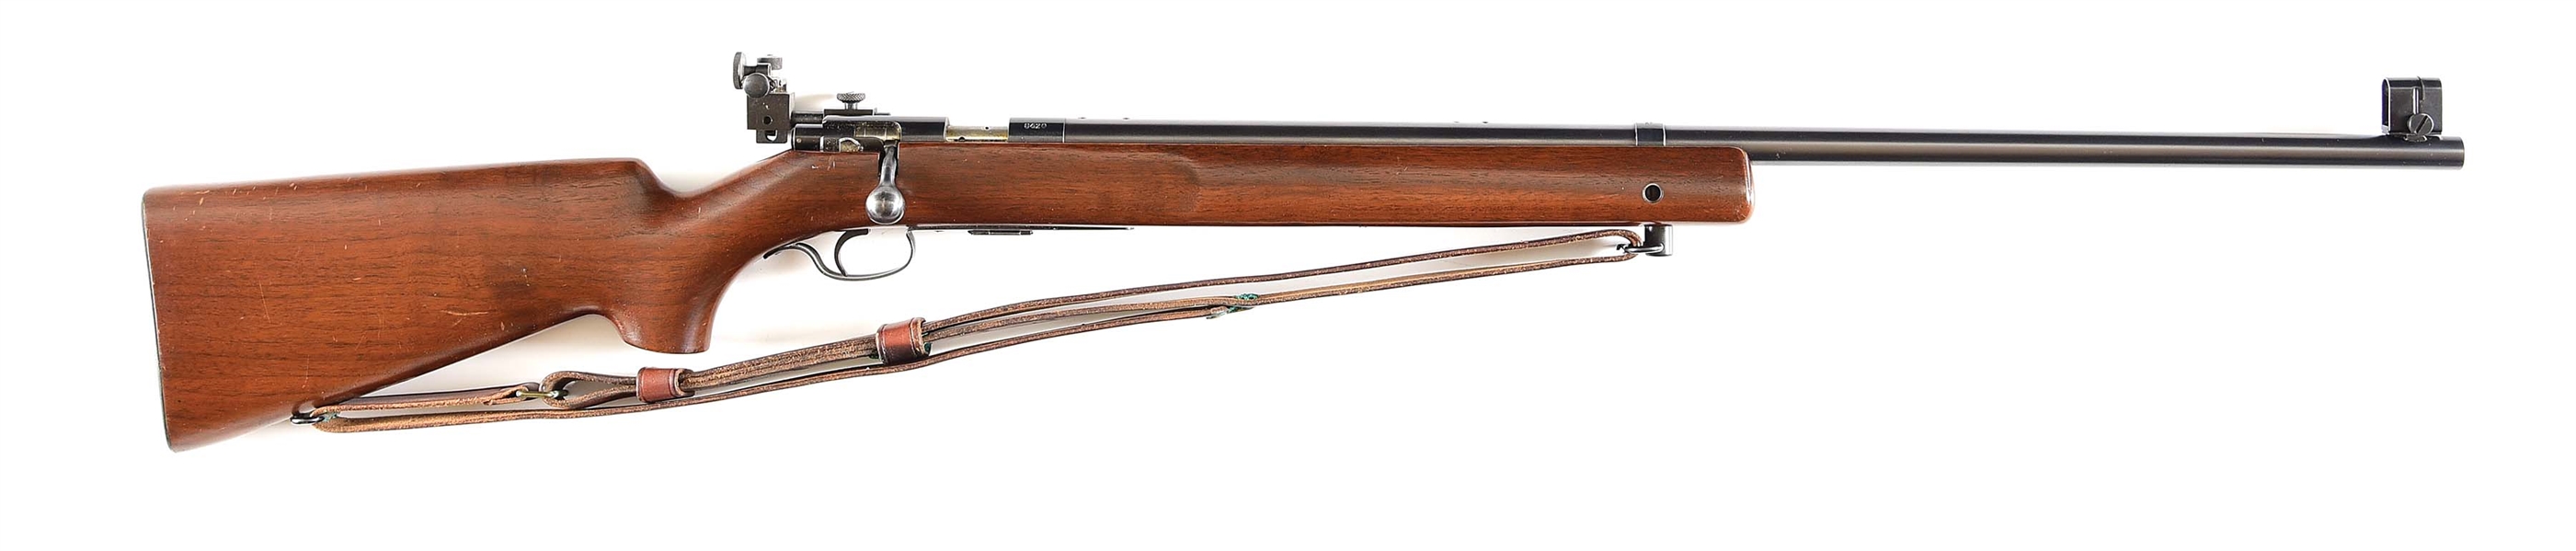 (C) WINCHESTER MODEL 75 BOLT ACTION TARGET RIFLE.